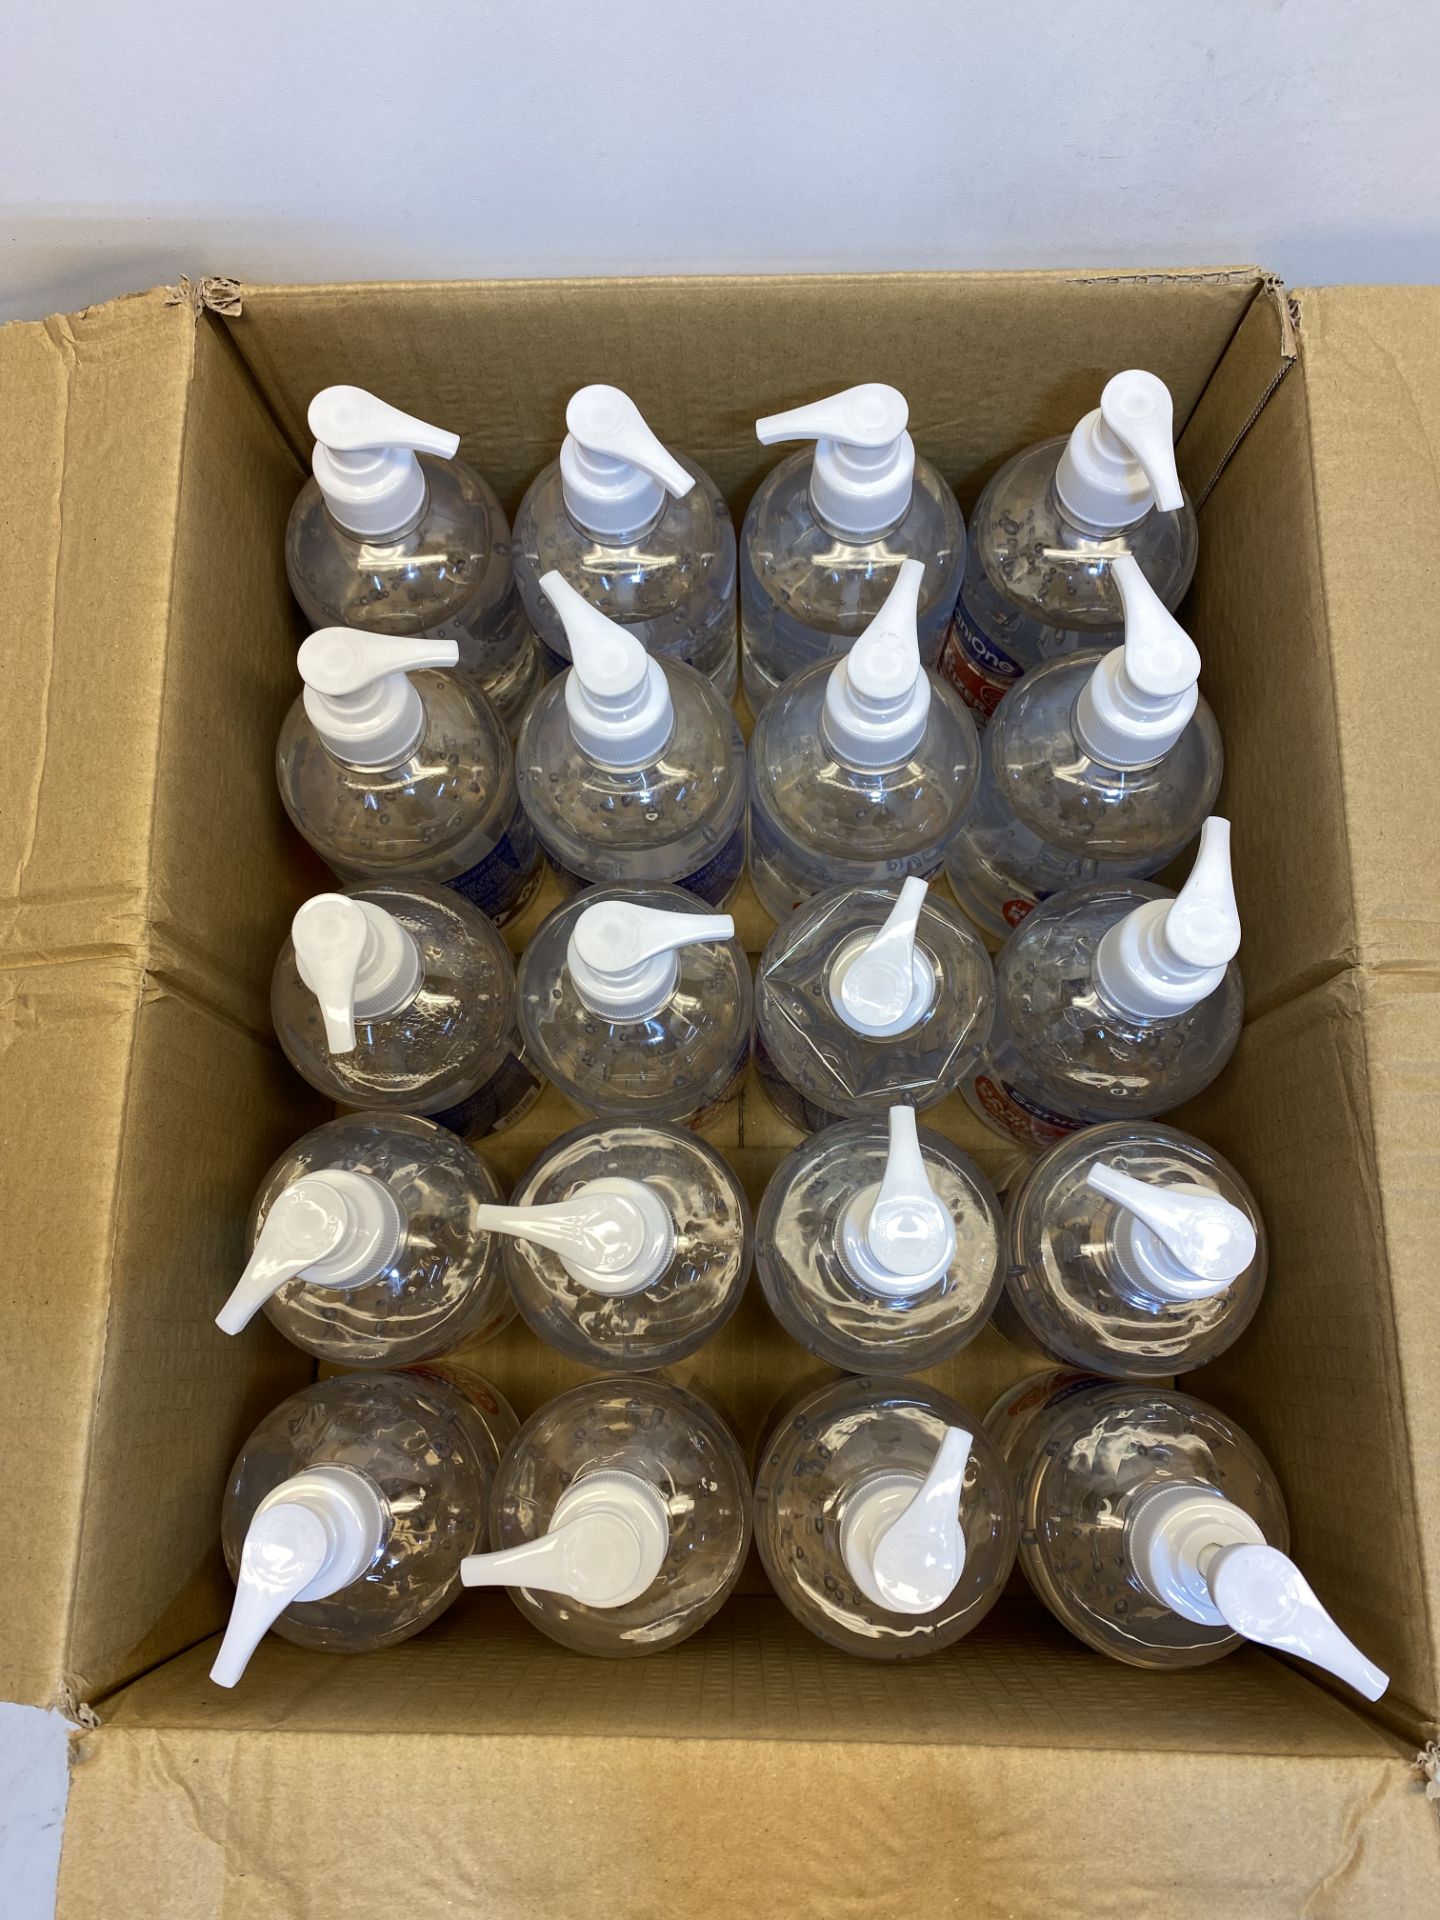 5x Boxes of 20 x 500ML Bottles Of Strawberry instant Hand Sanitizer Gel - Image 2 of 3